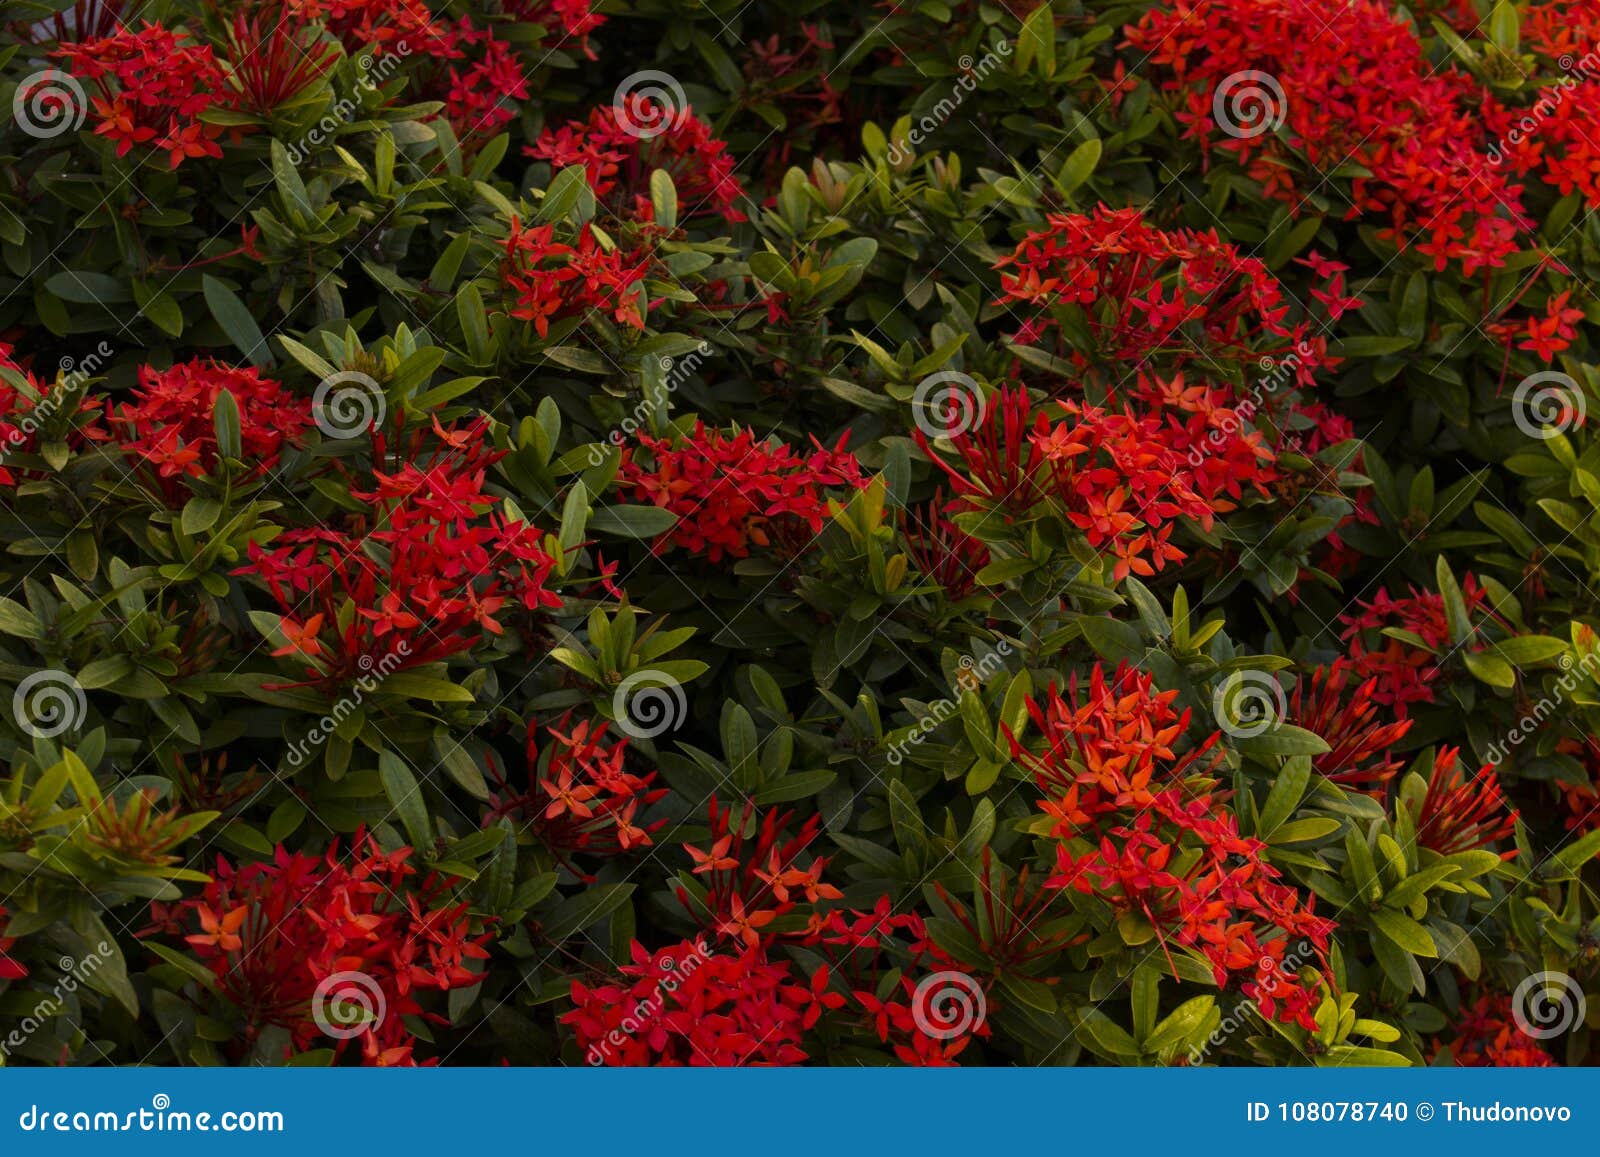 Red Flowers on Evergreen Shrub. Stock Photo   Image of florescence ...